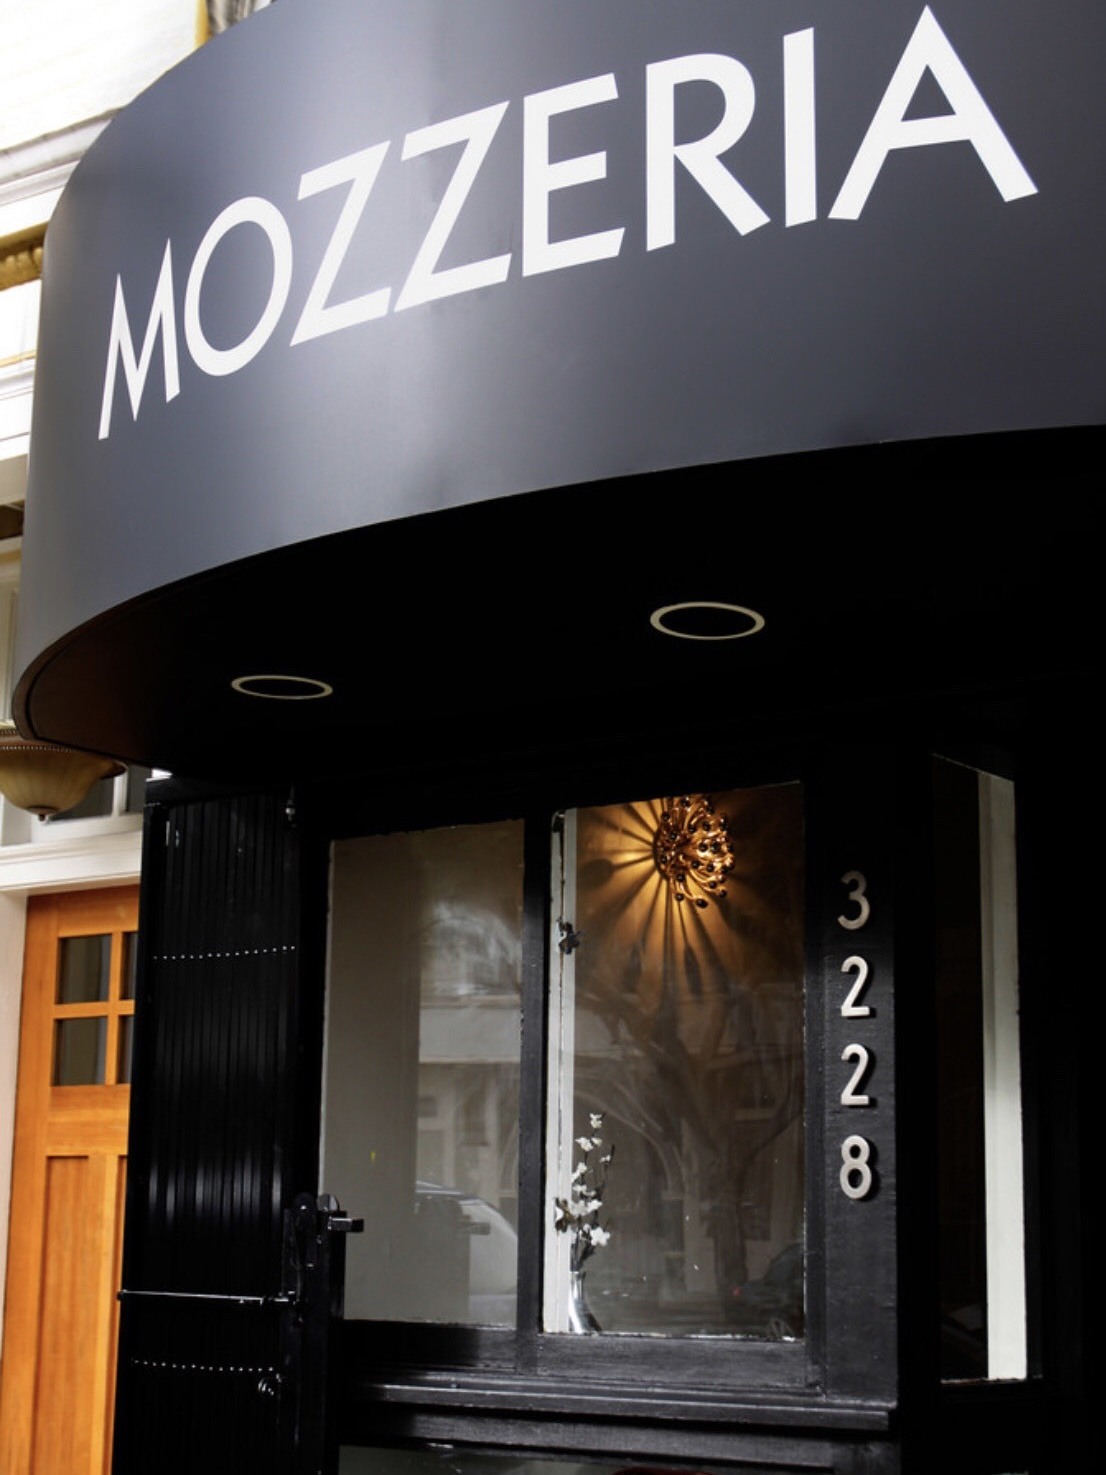 Not only does Mozzeria have a brick-and-mortar storefront, food truck and catering business, it was recently selected as the first business partner of the Communication Service for the Deaf.